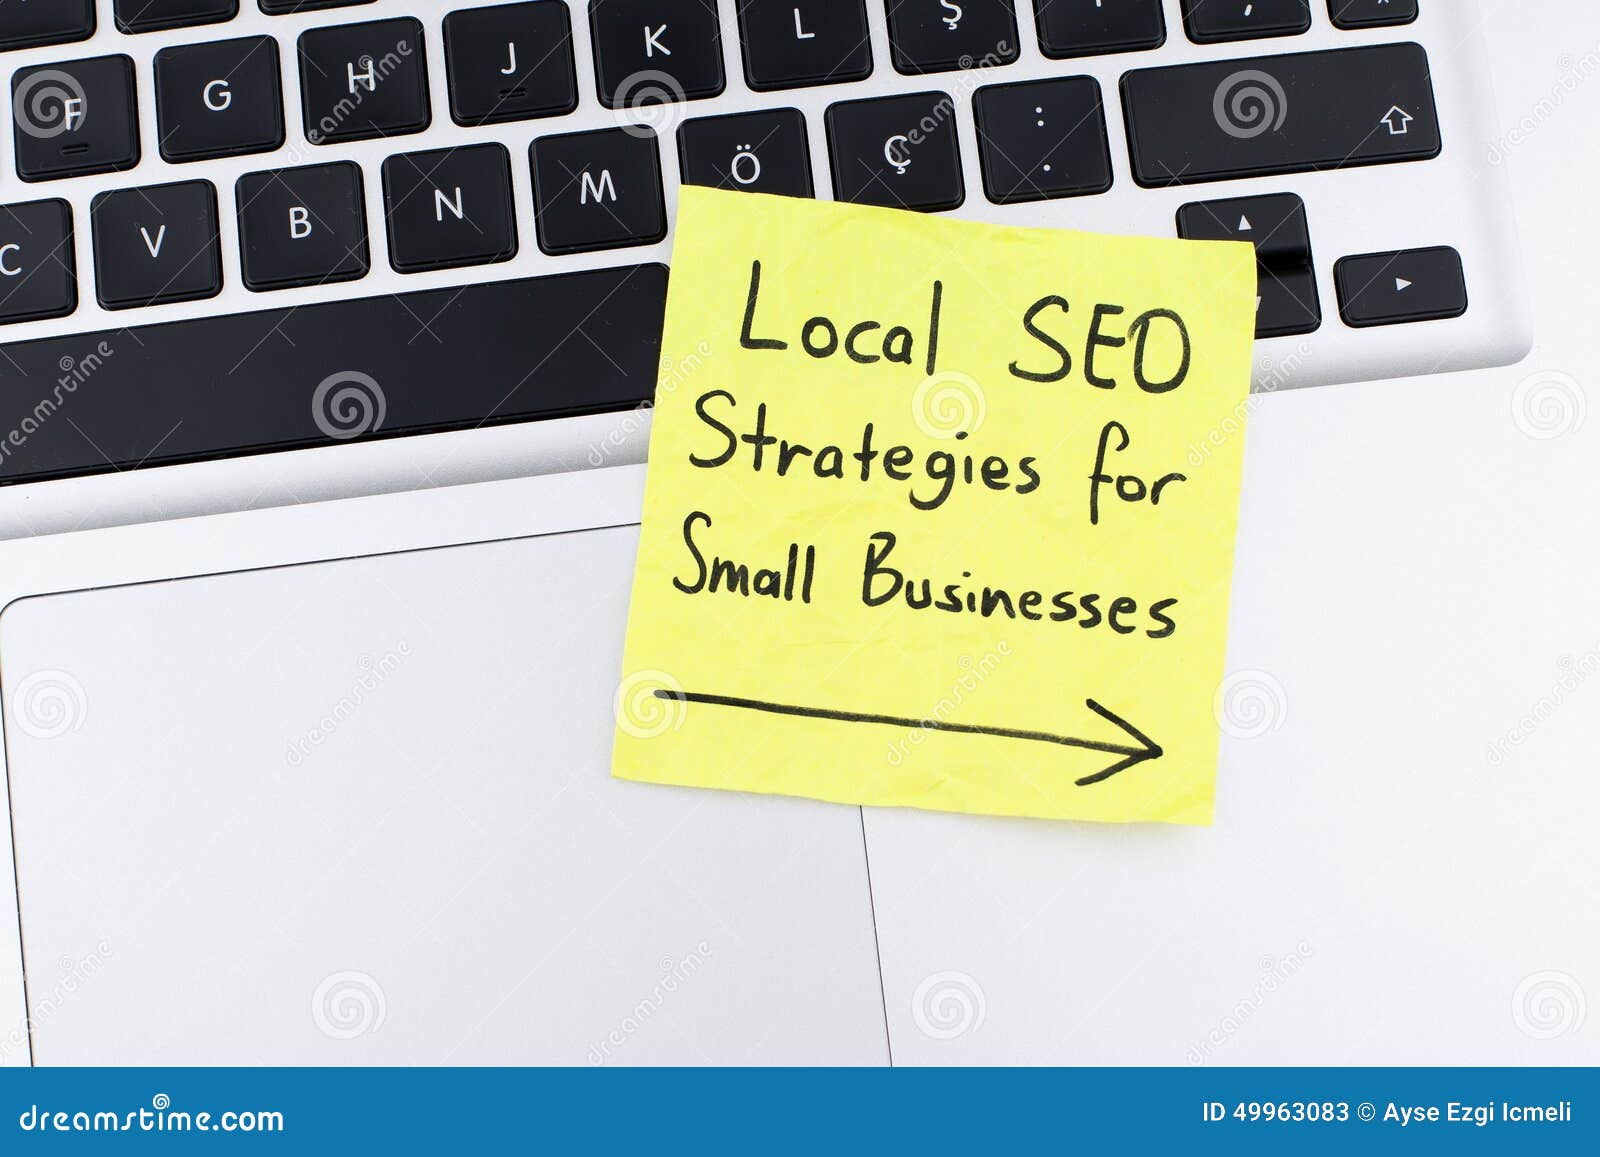 local seo strategy search engine optimization concept background